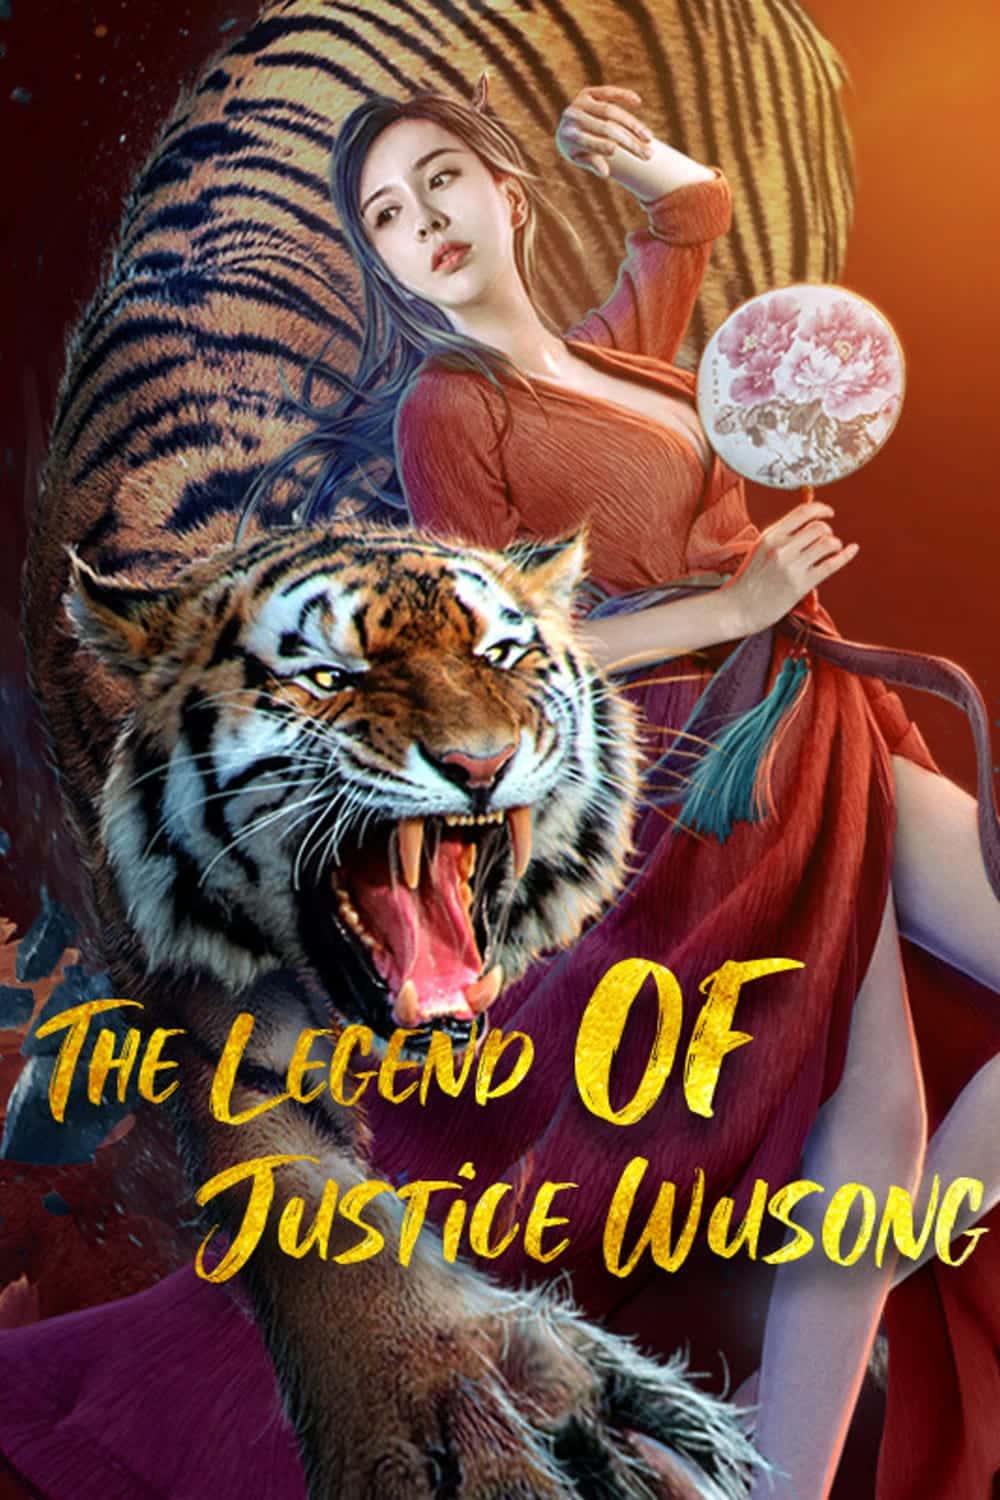 The Legend of Justice WuSong (2021) Dual Audio [Hindi - Chinese] Full Movie HD ESub